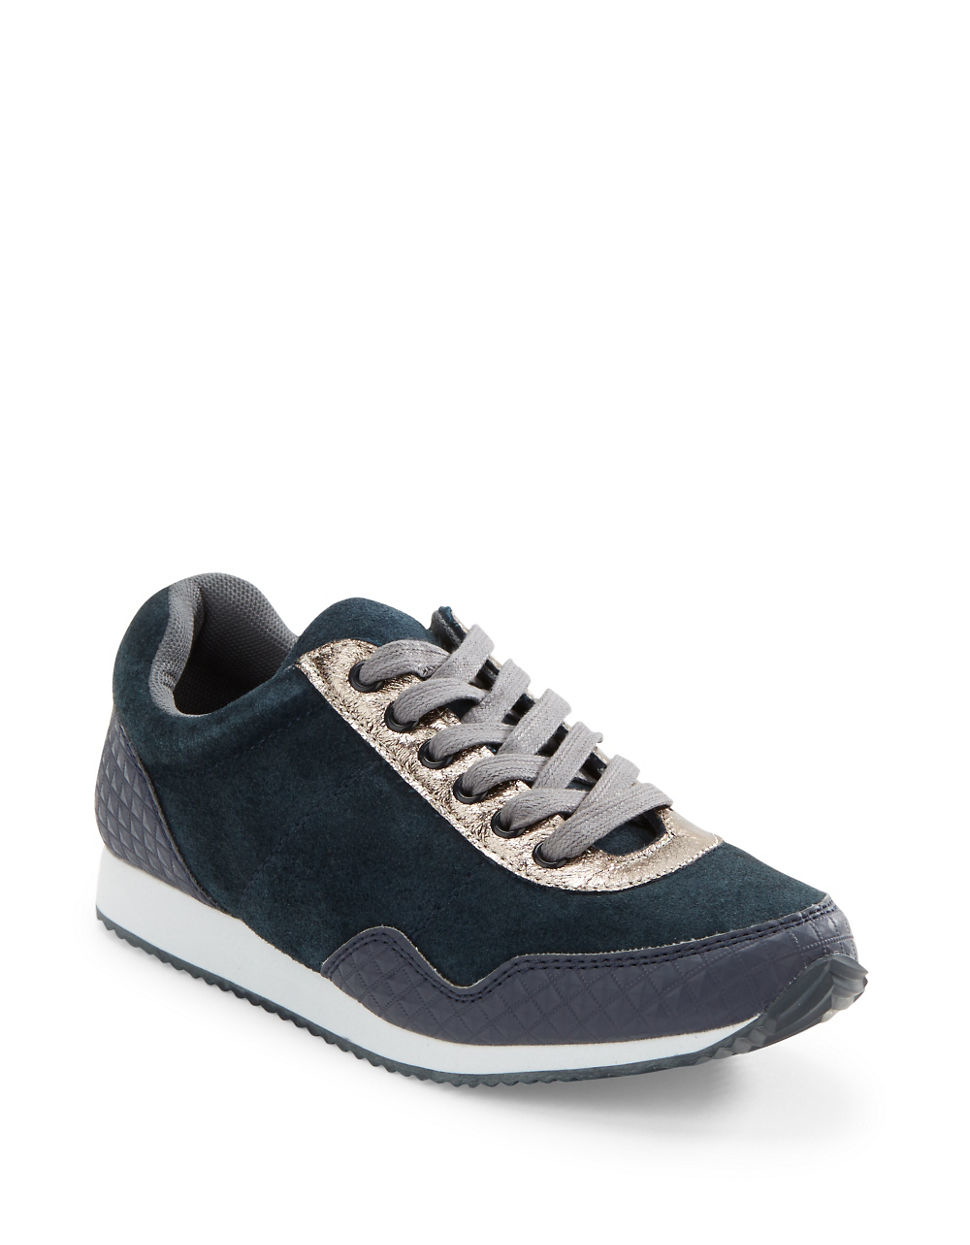 Lyst - Lord & taylor Devico Lace-up Sneakers in Blue